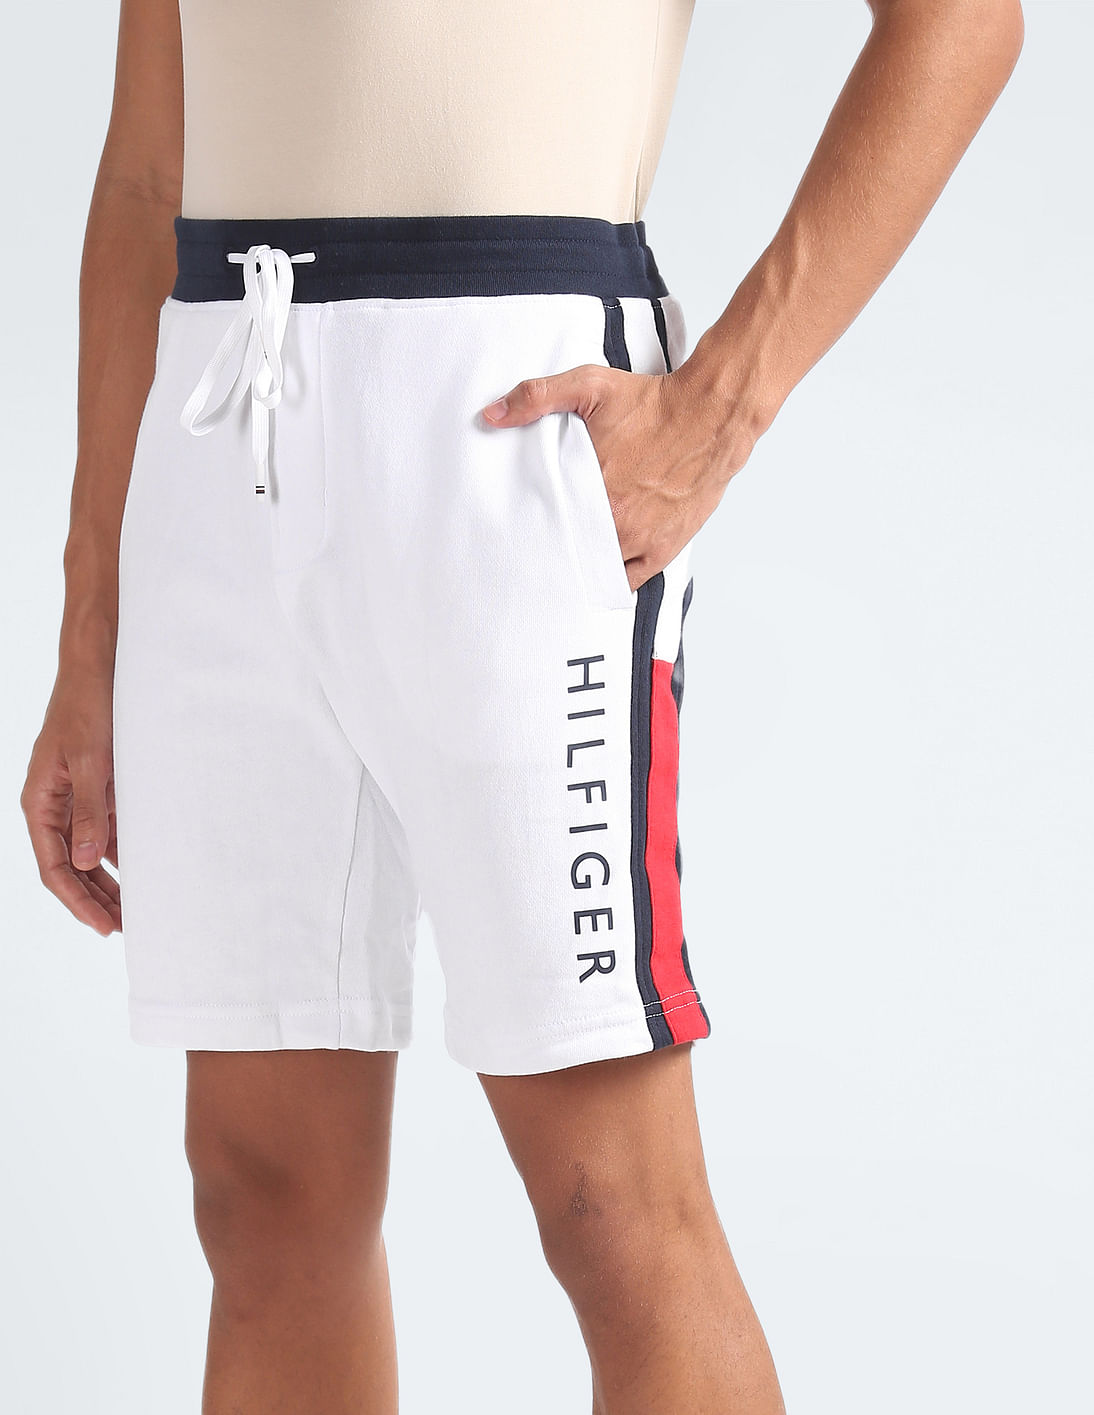 Buy Tommy Hilfiger Lounge Shorts in Black/Grey Heather/White 2024 Online